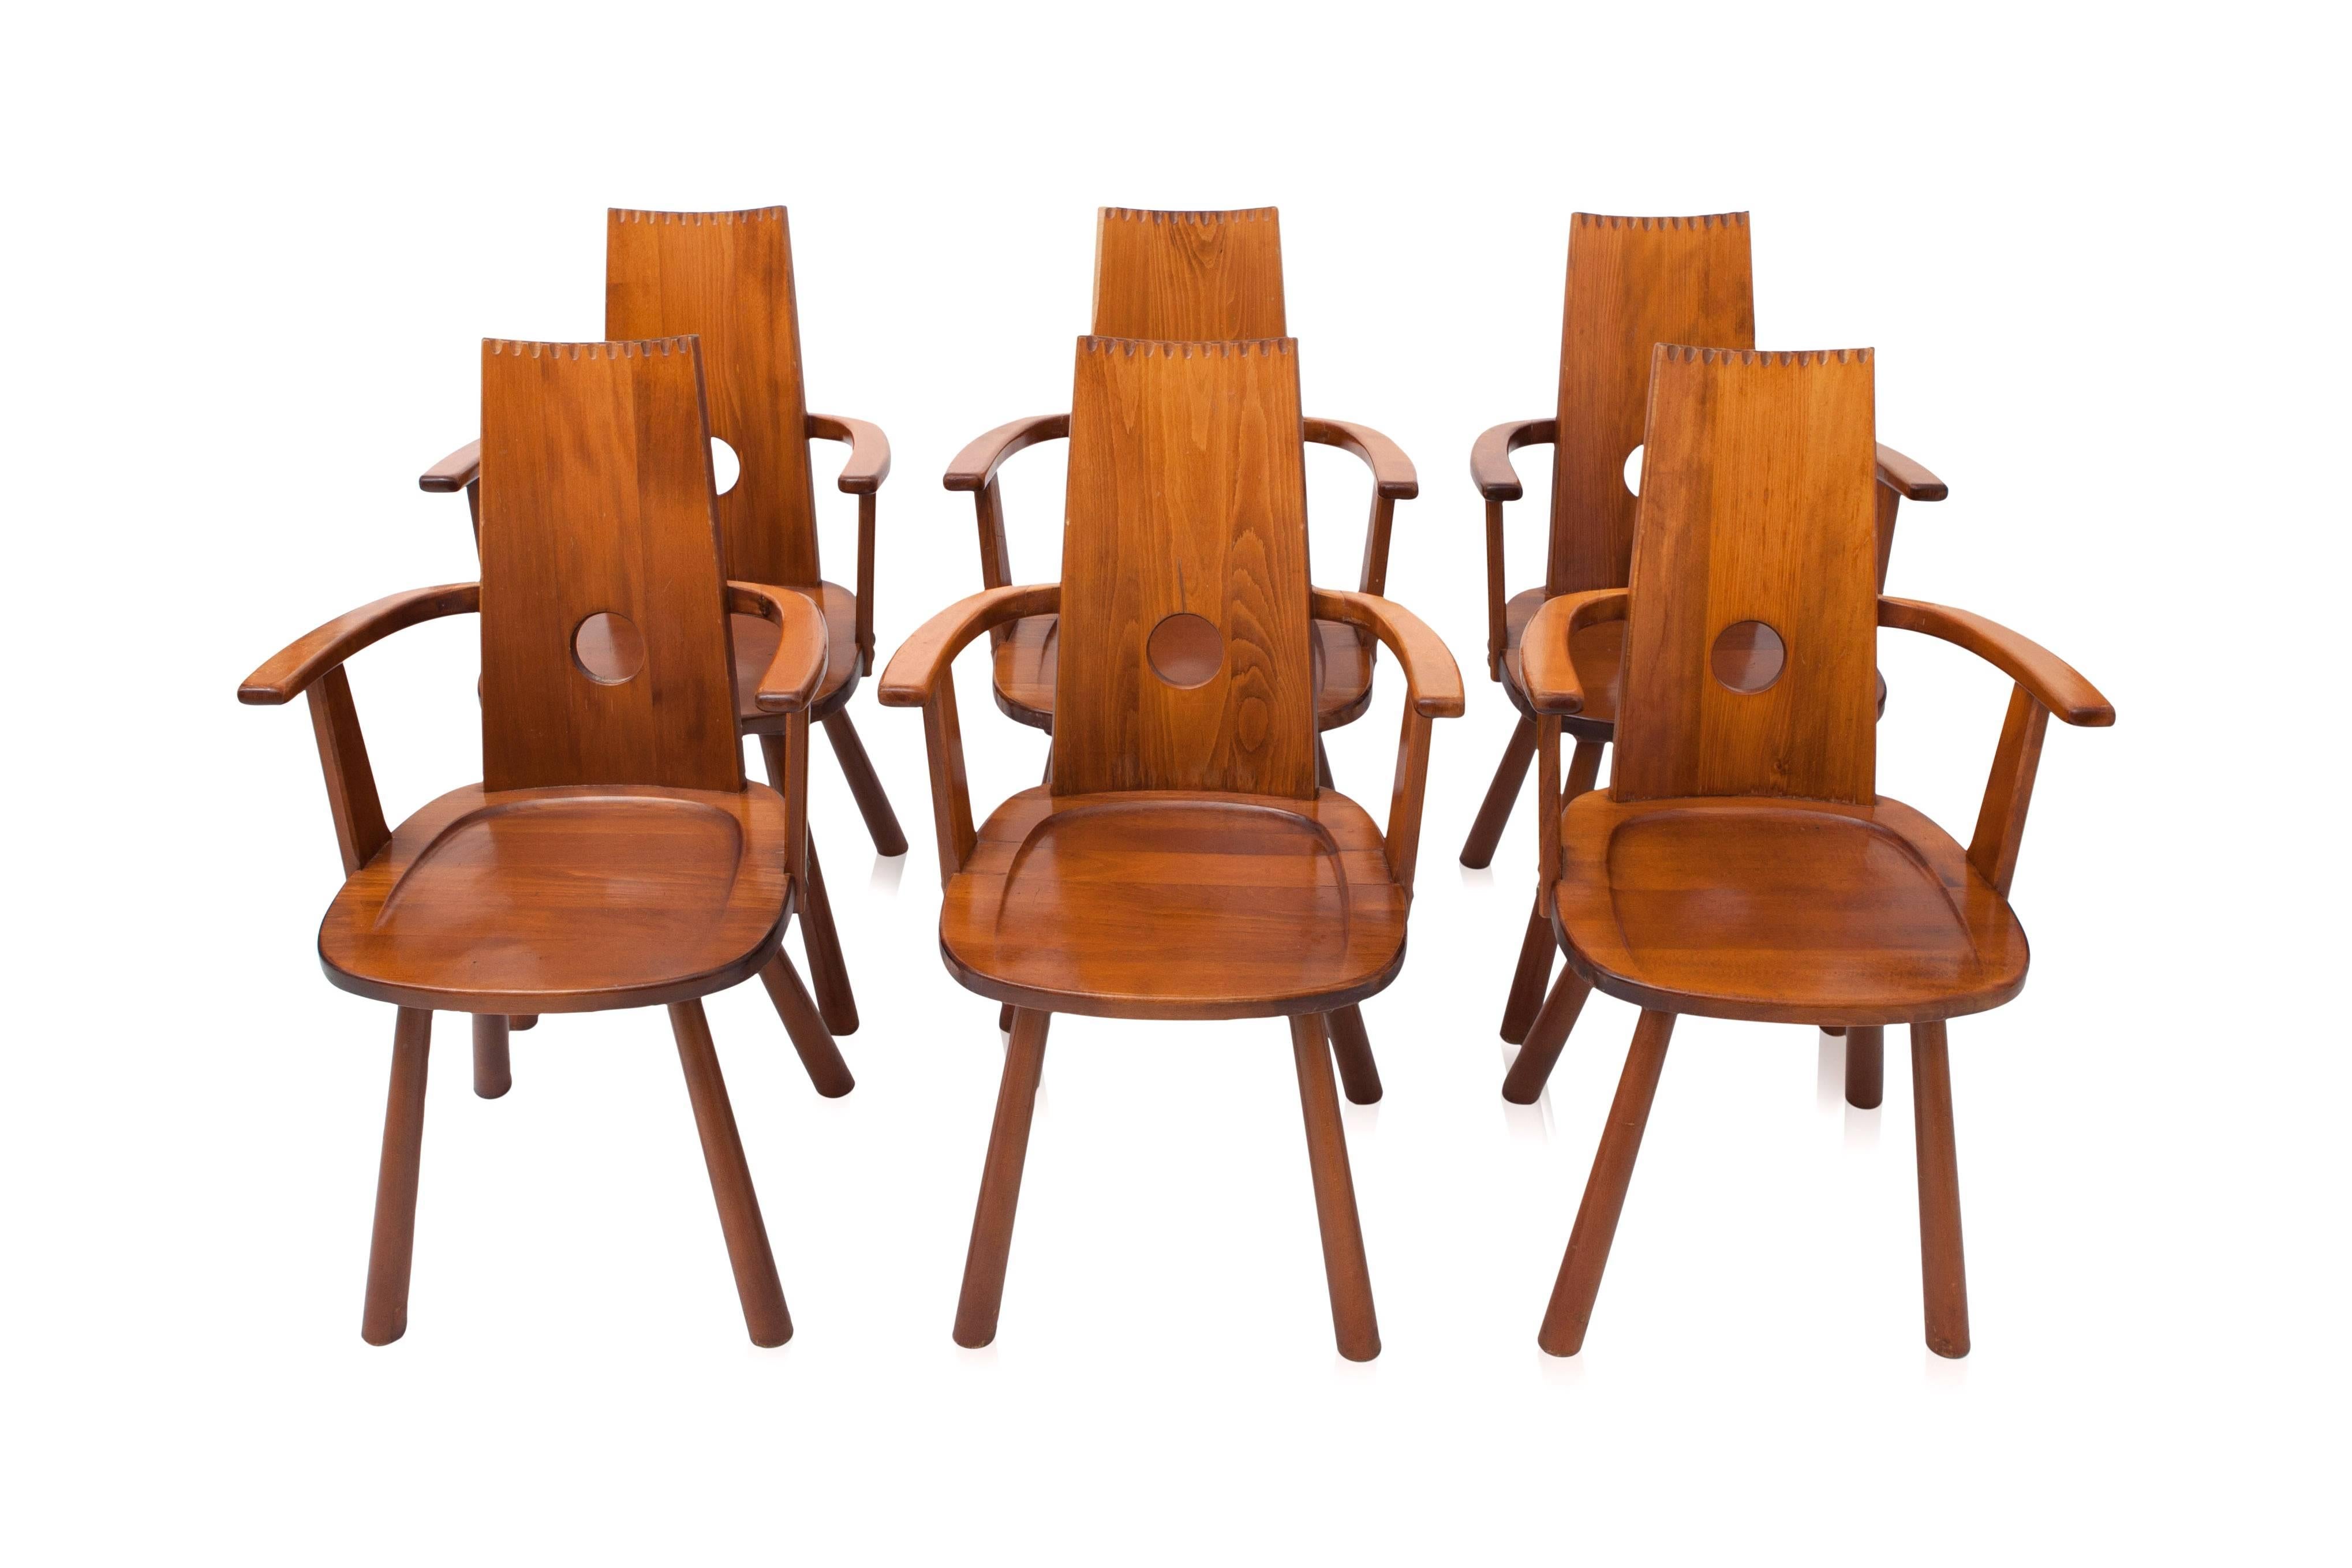 Mid-20th Century French Mid-Century Modern Dining Chairs, set of six